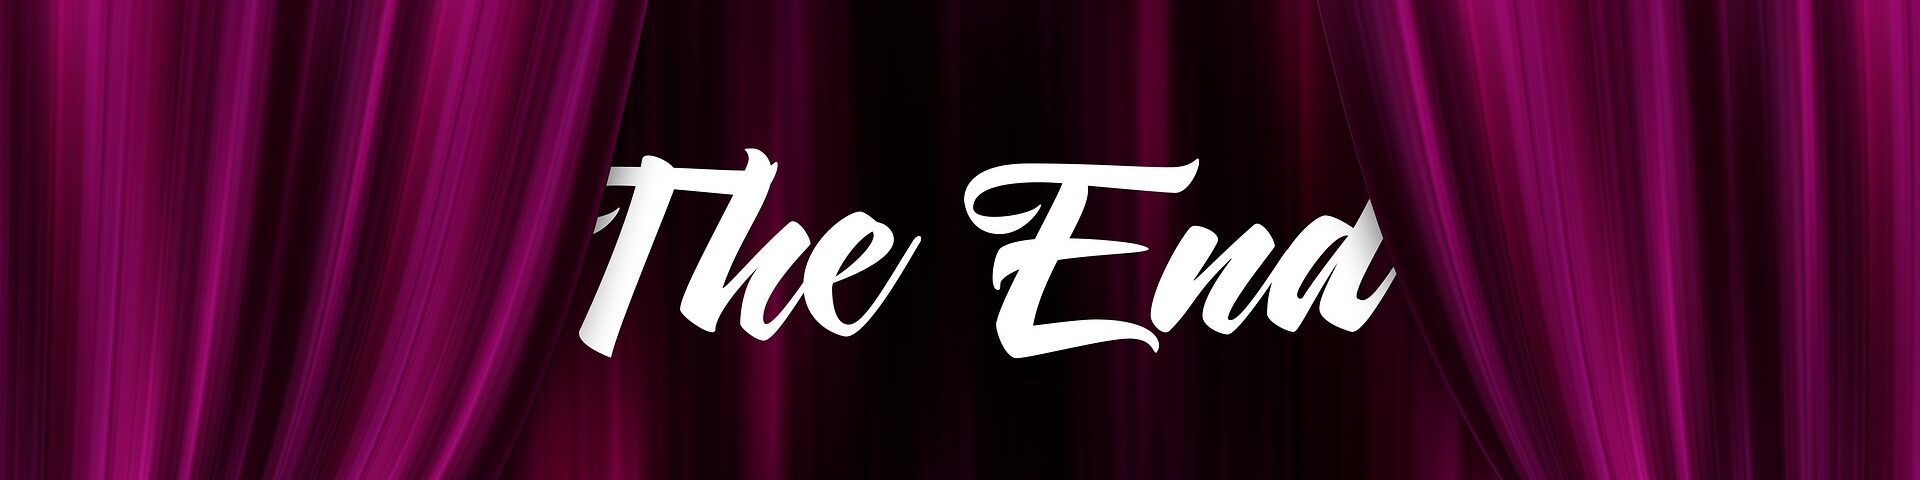 The End - Theatervorhang